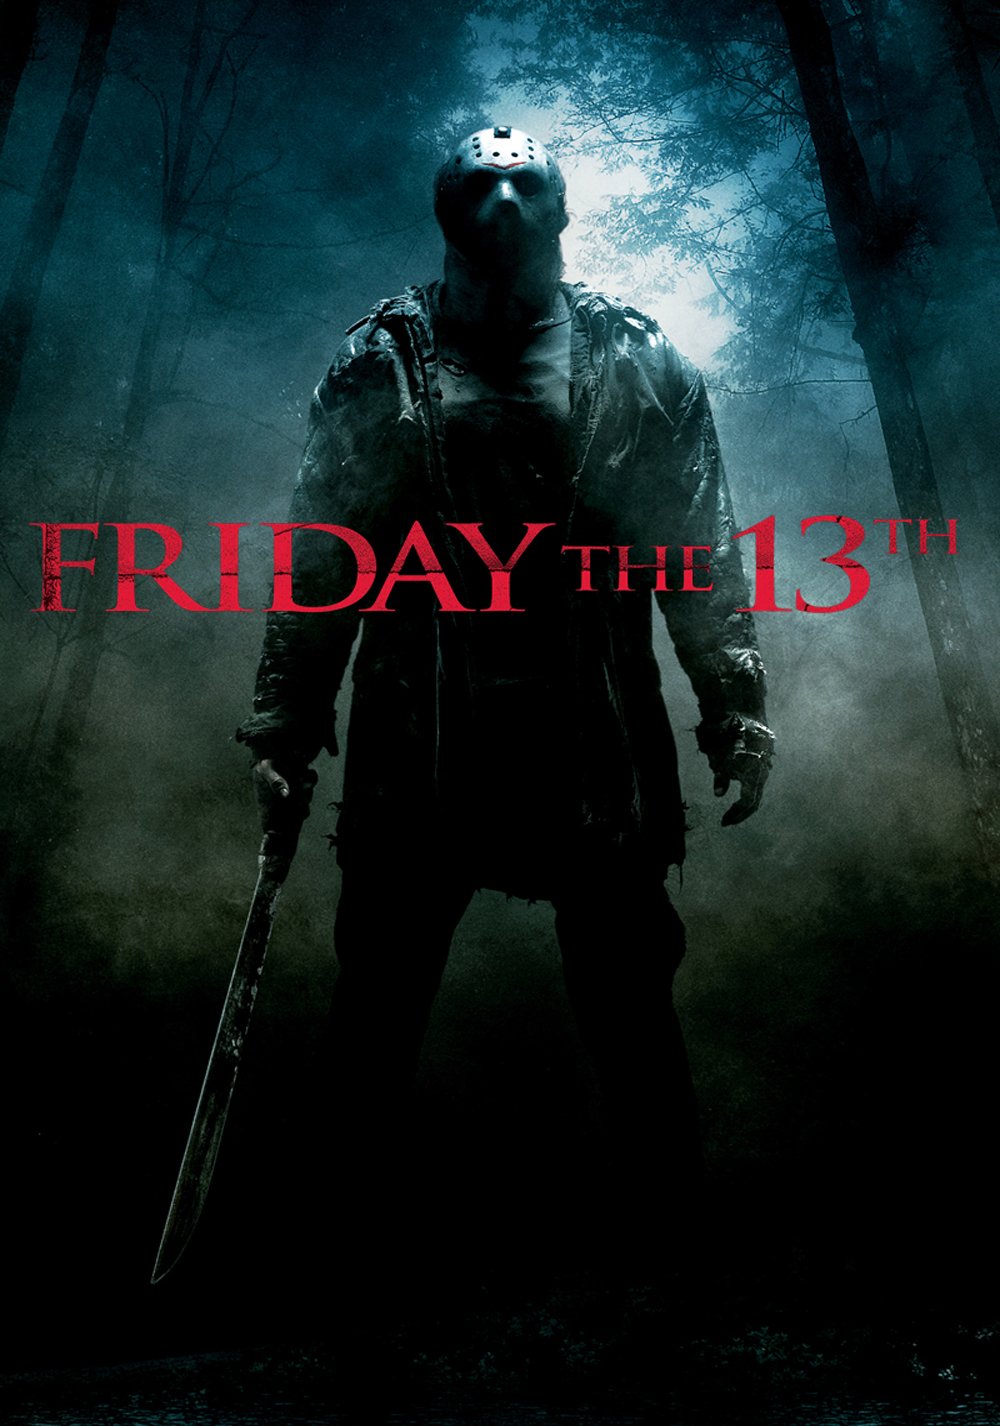 friday-the-13th-2009-movie-poster-id-93158-image-abyss